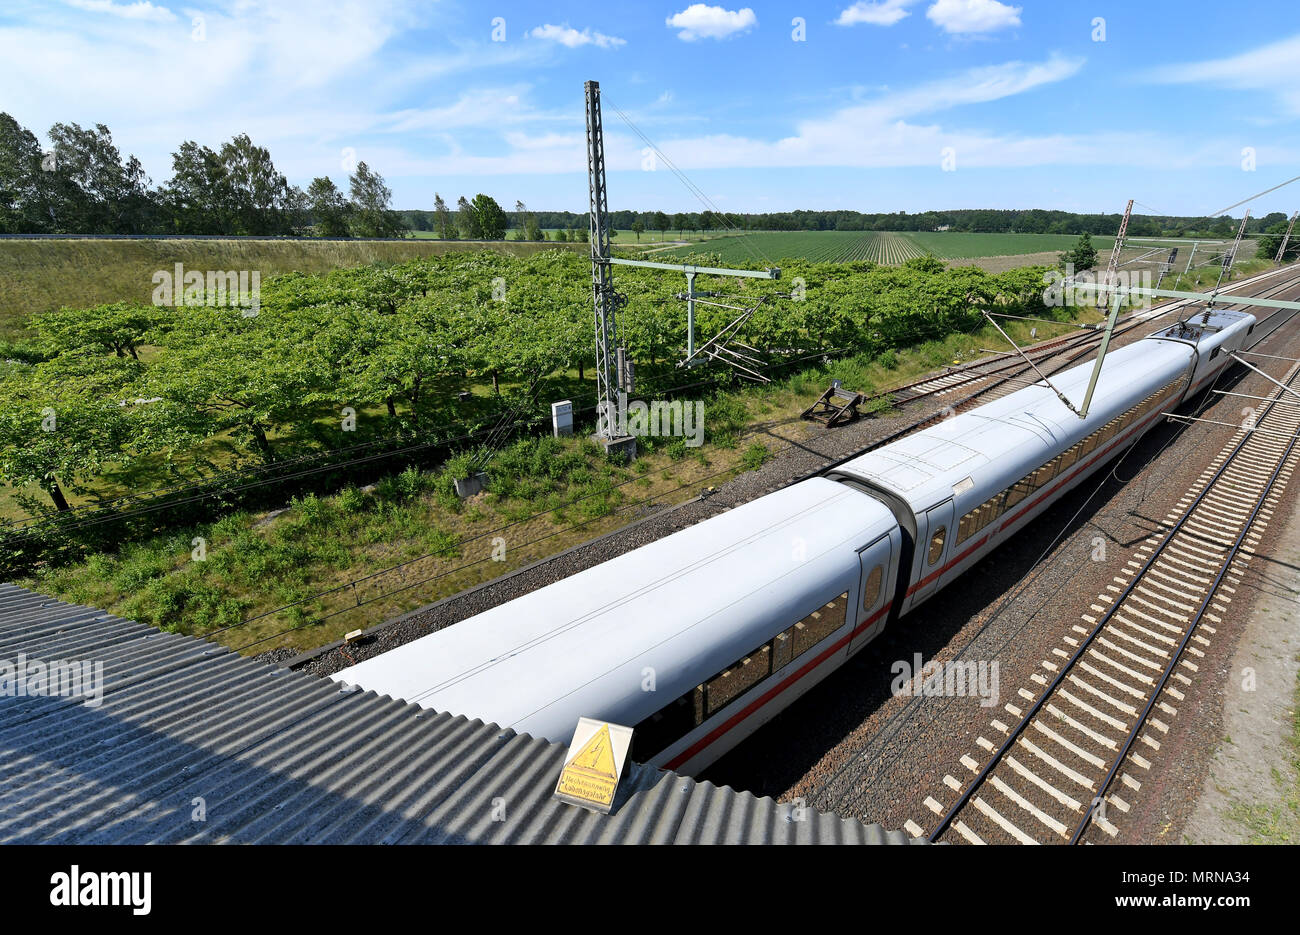 24 May 2018, Germany, Eschede: An Inter City Express (ICE) train passes the memorial site for the 1998 Eschede ICE derailment, where 101 cherry trees have been planted (C). On 3 June 1998, the ICE 884 'Wilhelm Conrad Roentgen' derailed on the Hannover-Hamburg route near the village of Eschede. 101 people died. Photo: Holger Hollemann/dpa Stock Photo